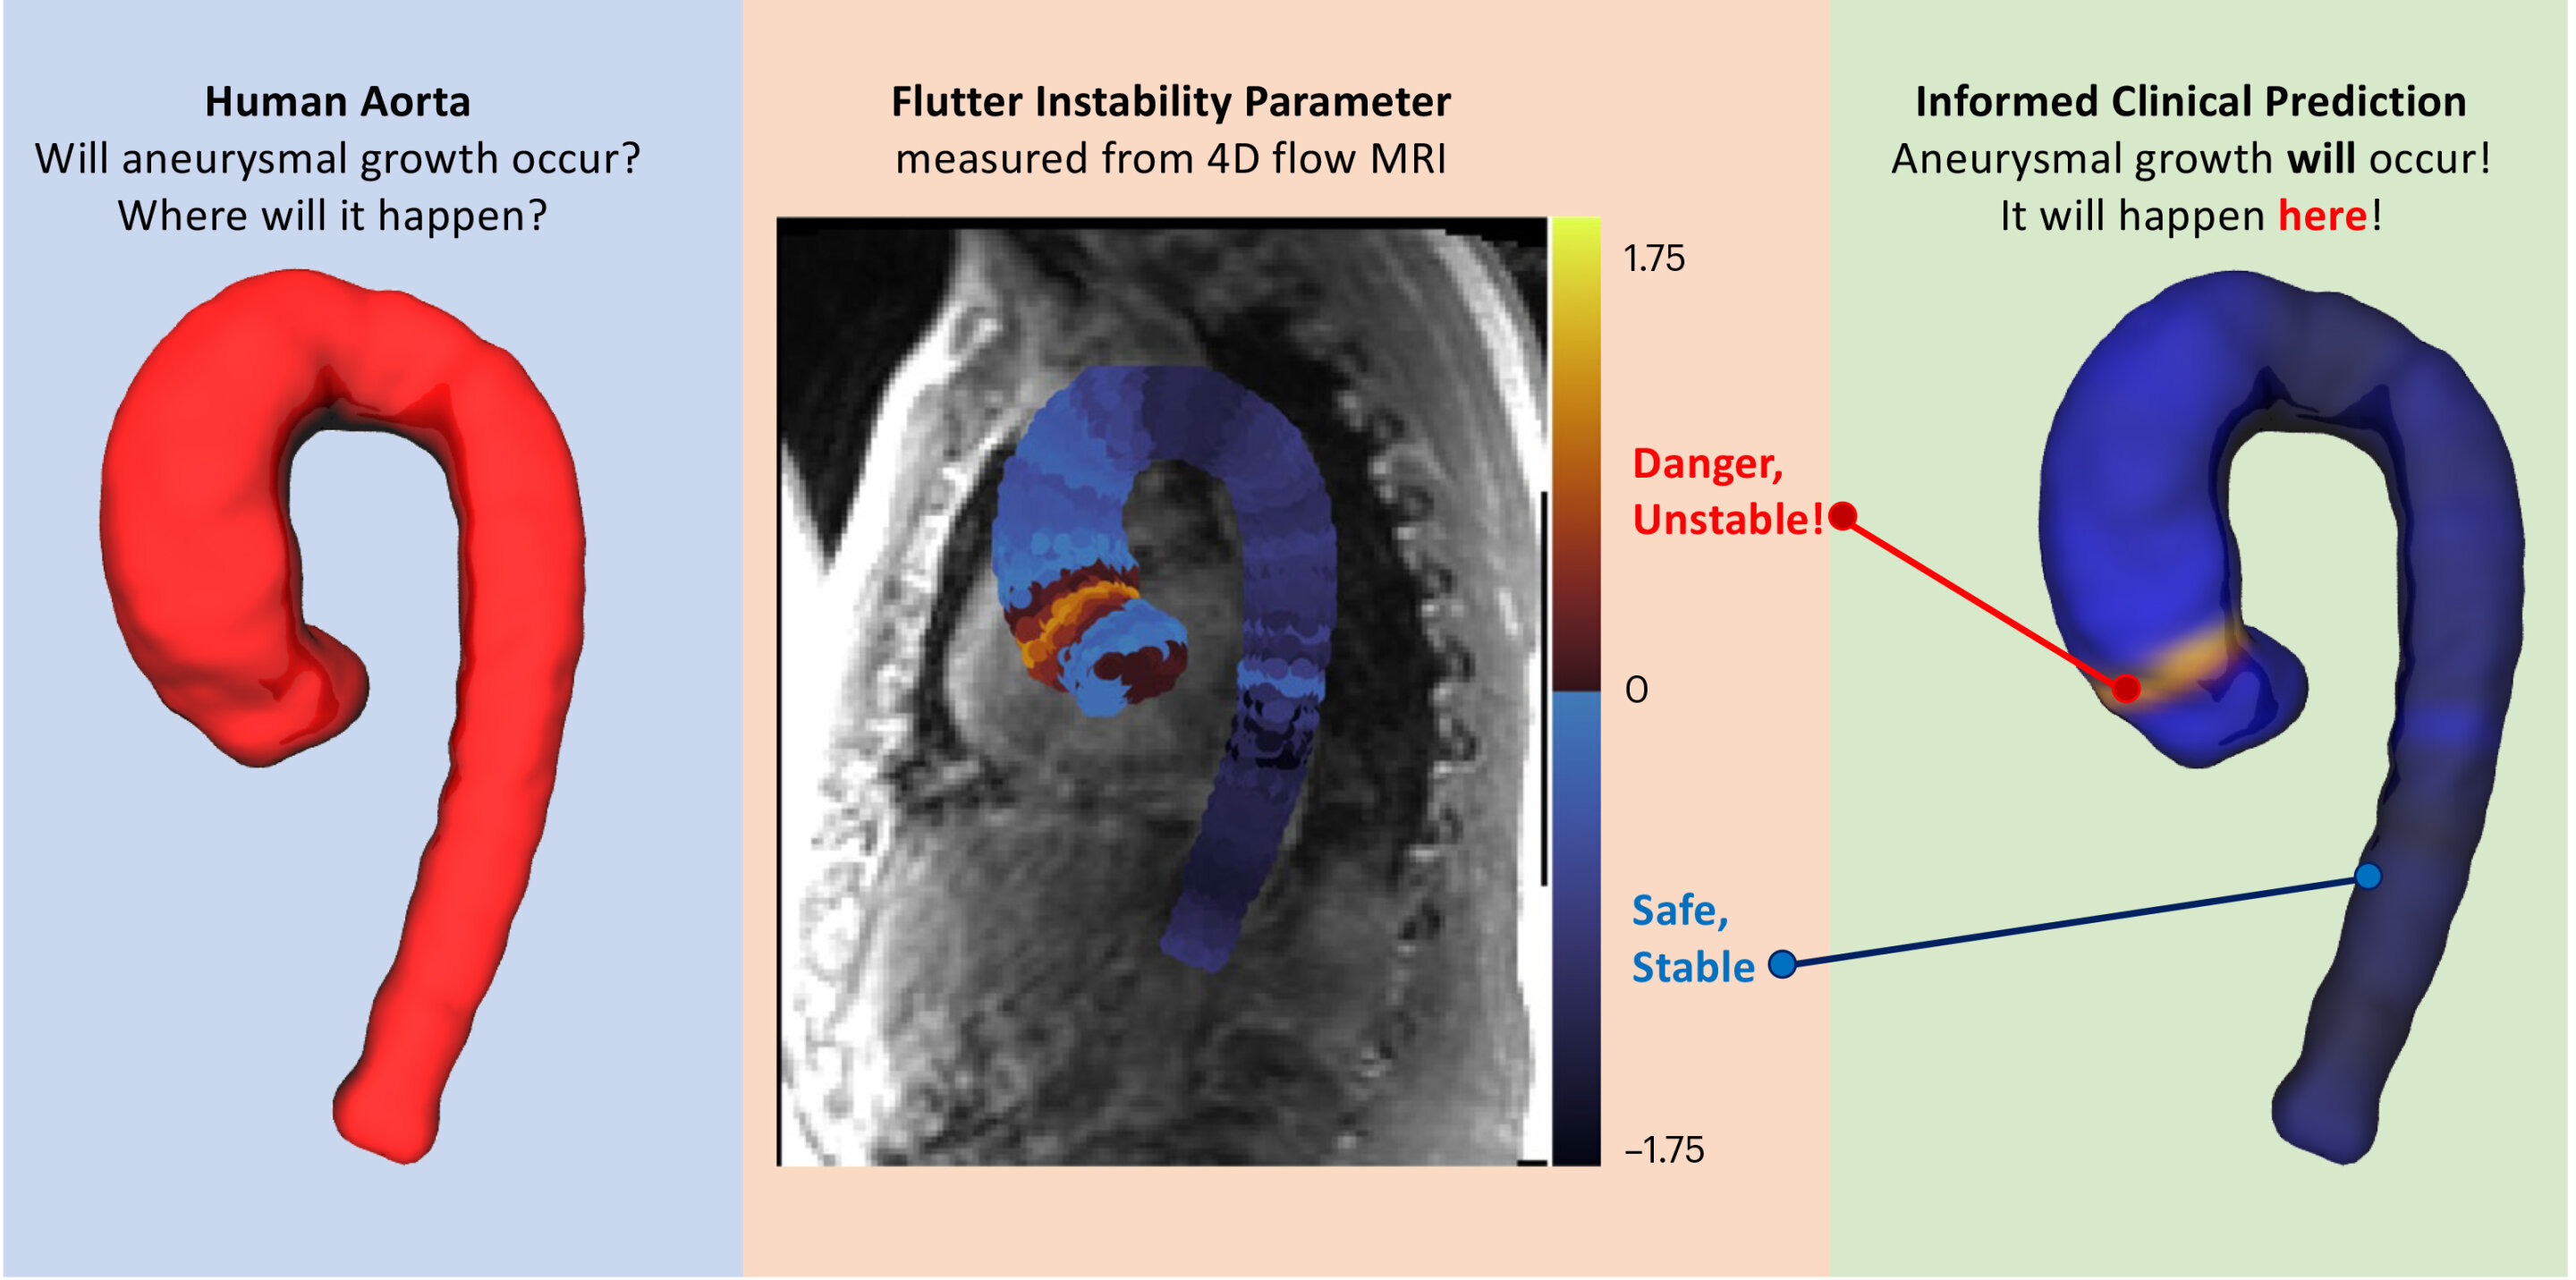 Unstable ‘flutter’ predicts aortic aneurysm with 98% accuracy